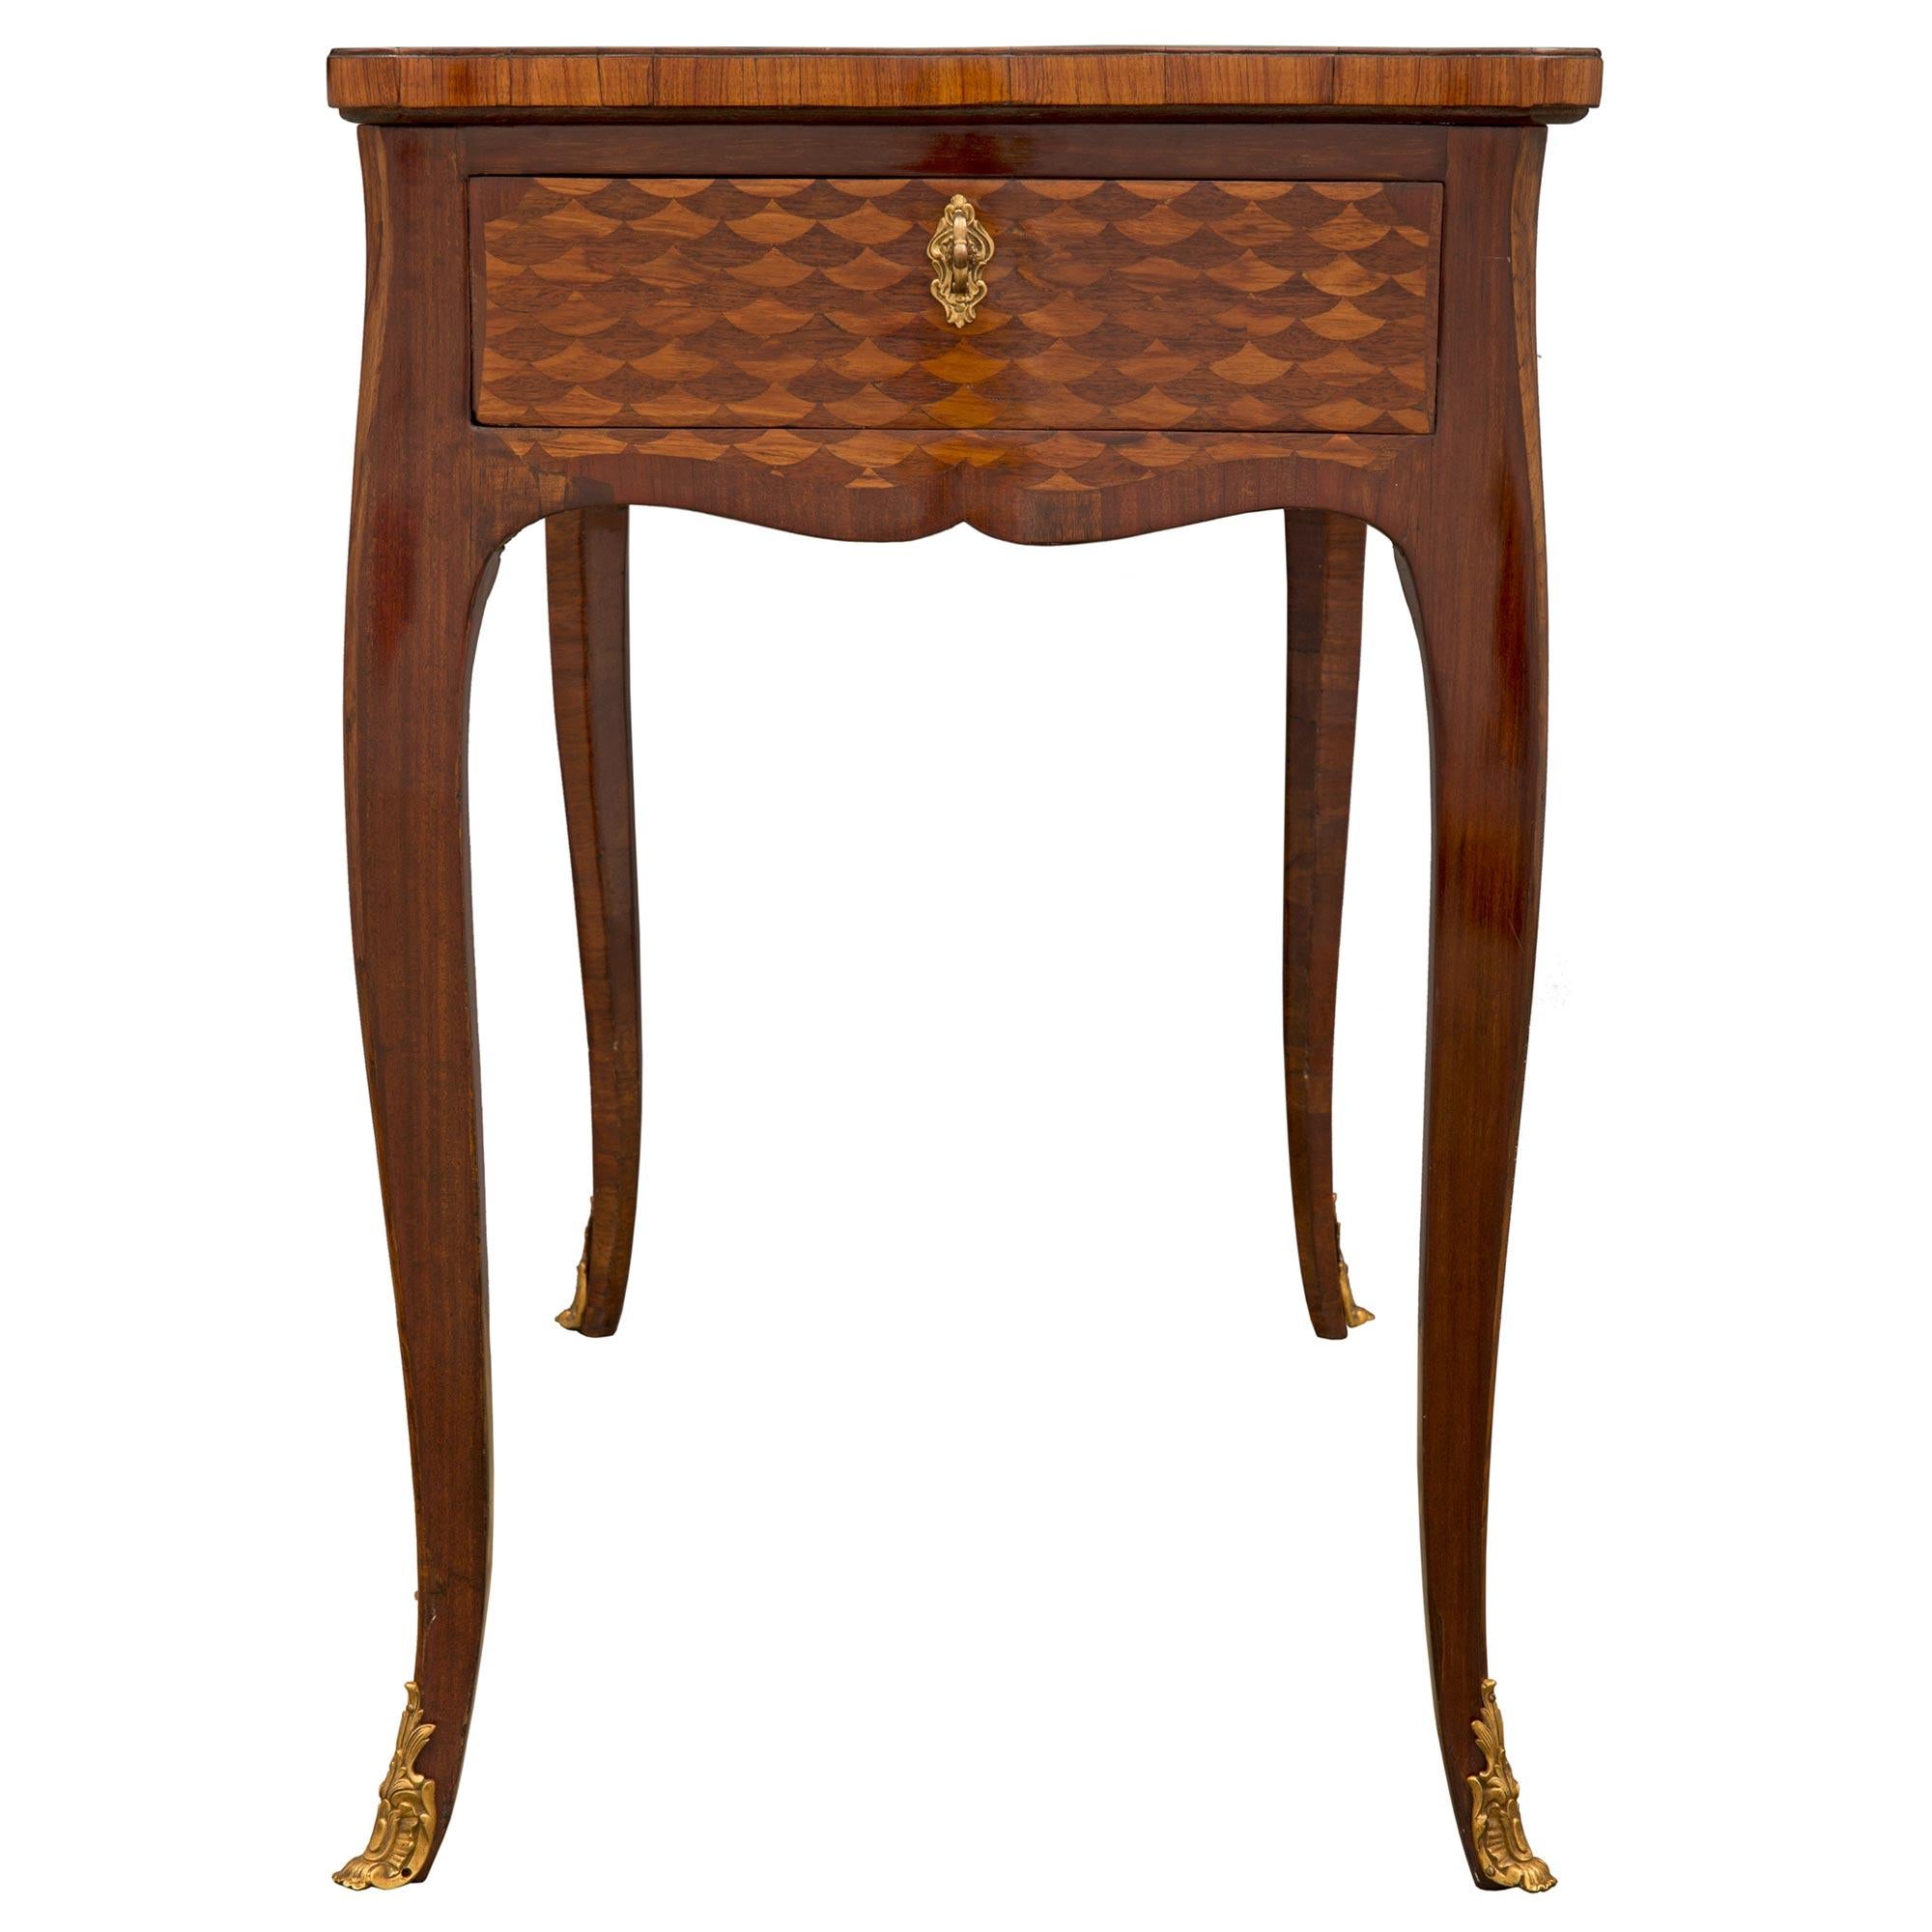 Ormolu French 18th Century Louis XV Period Kingwood And Tulipwood Desk For Sale